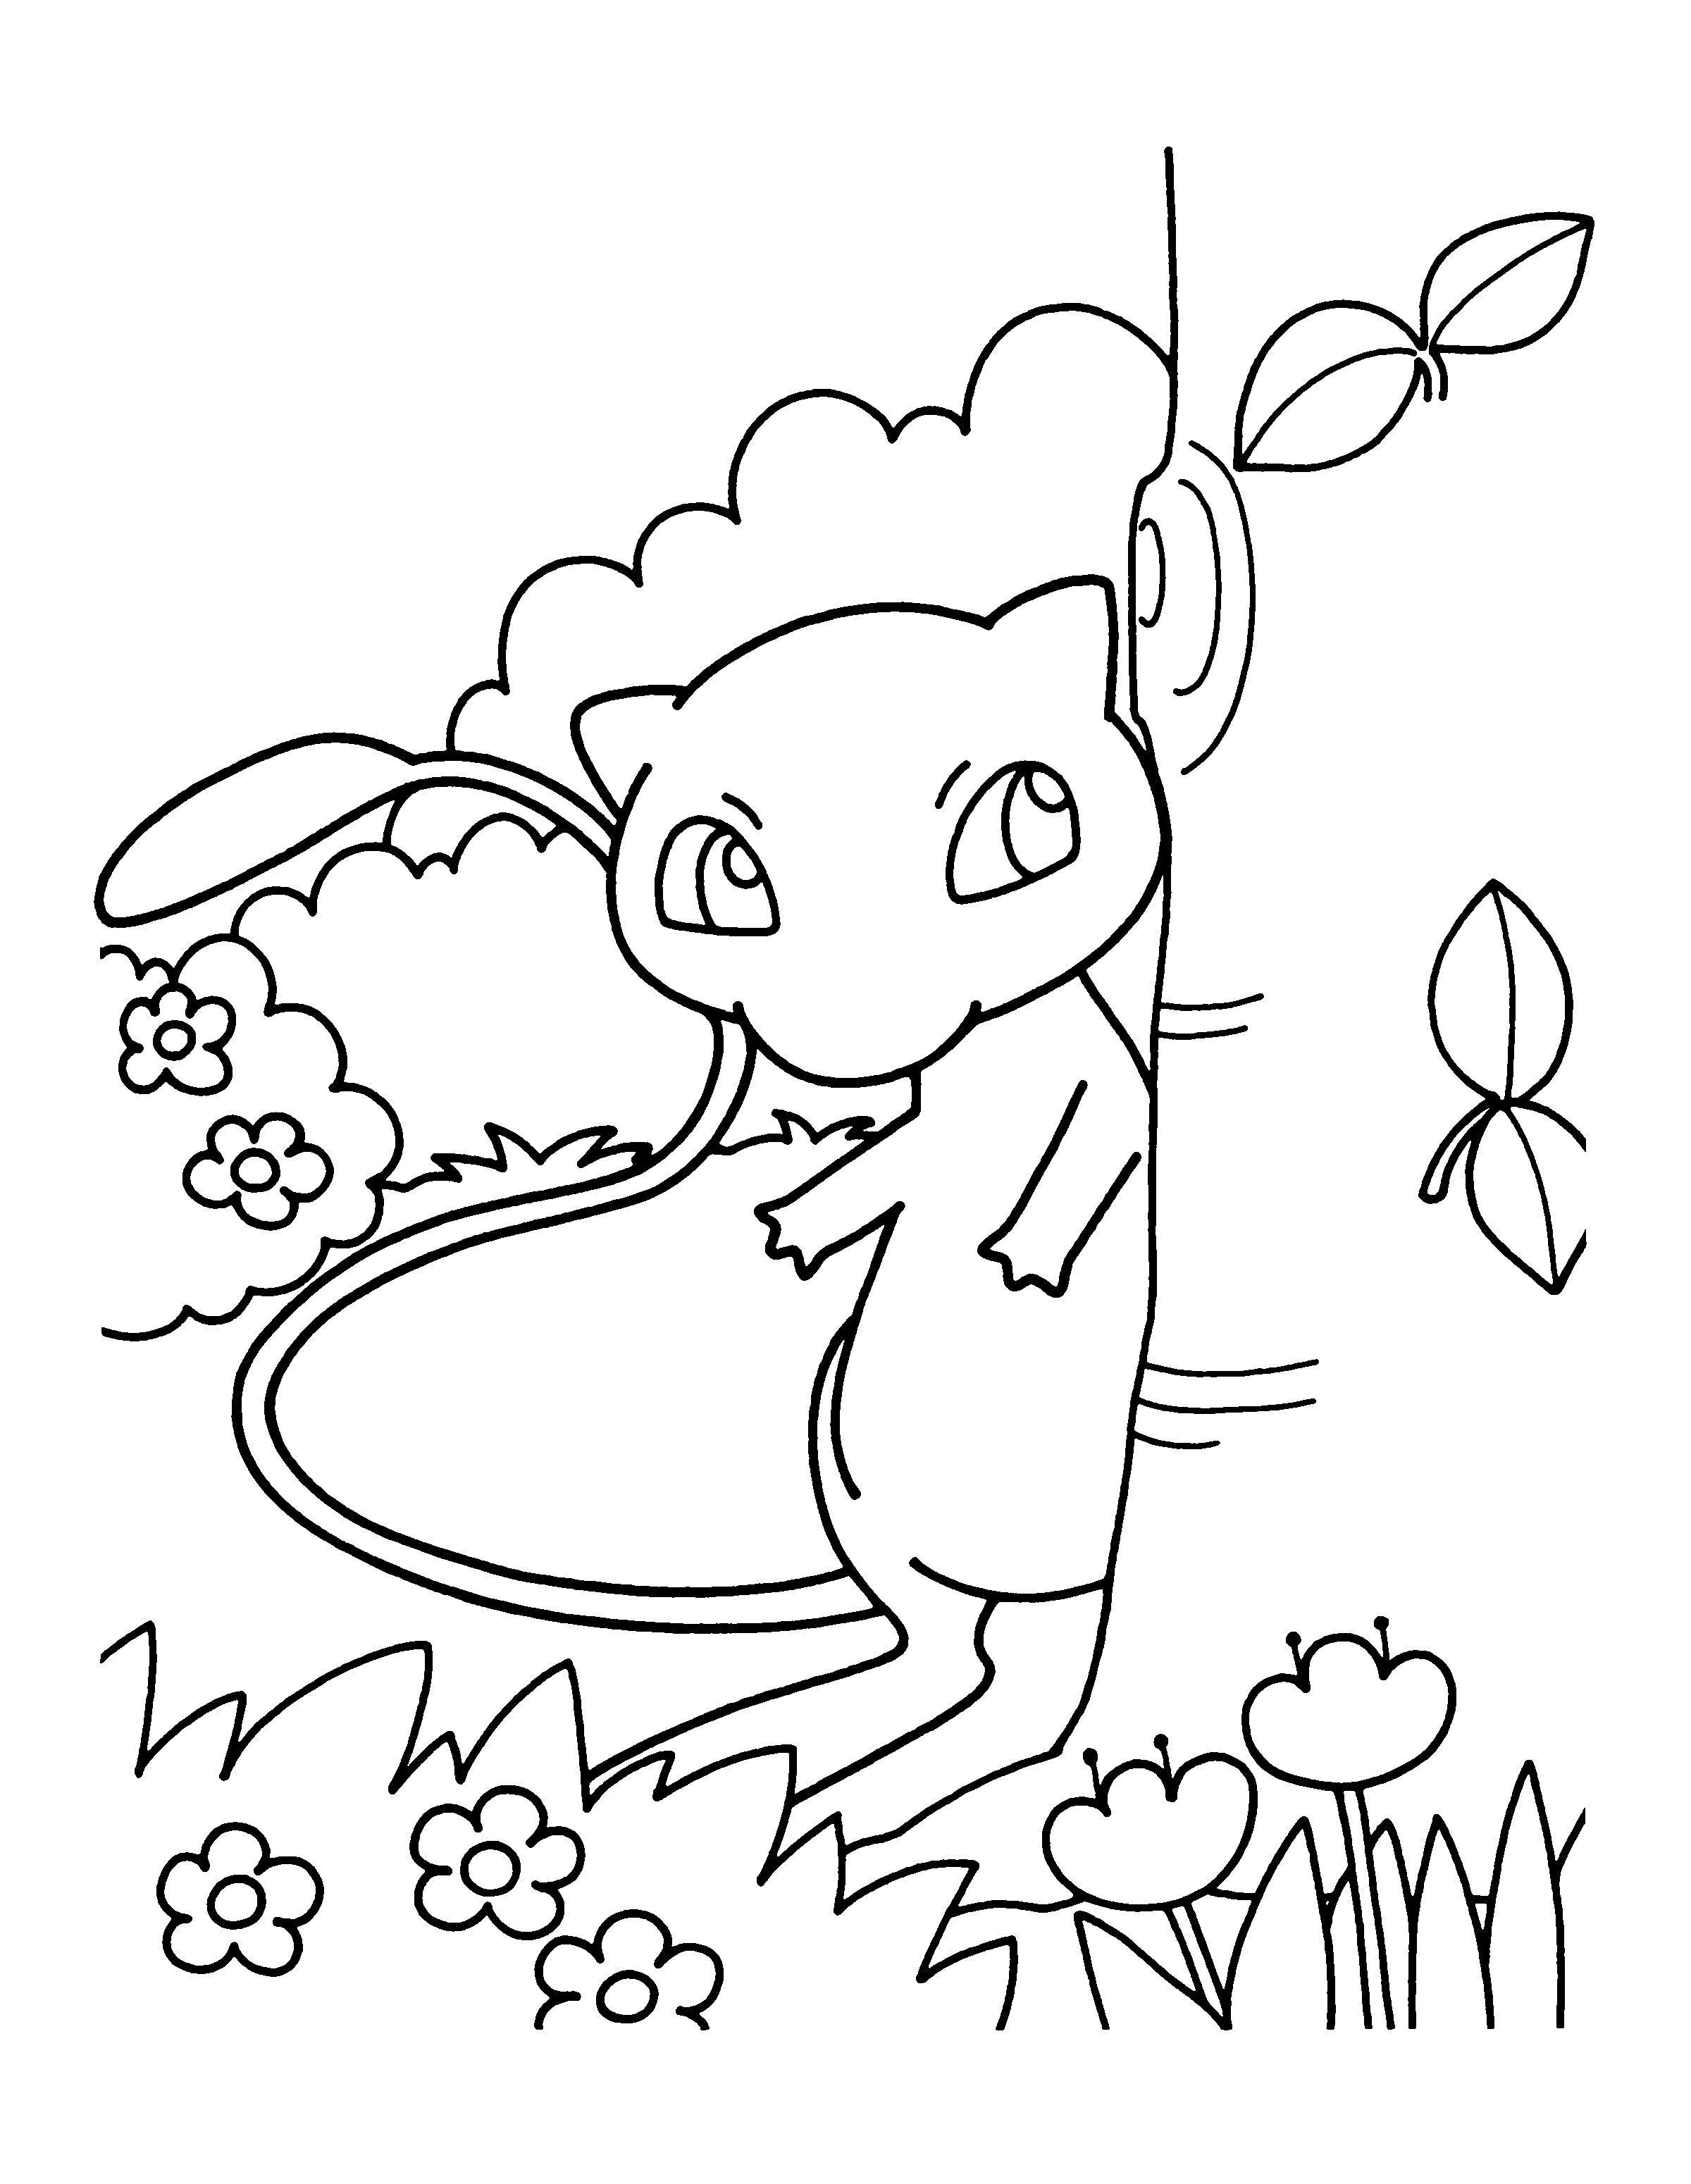 Pokemons 20 Coloring Pages   Coloring Cool